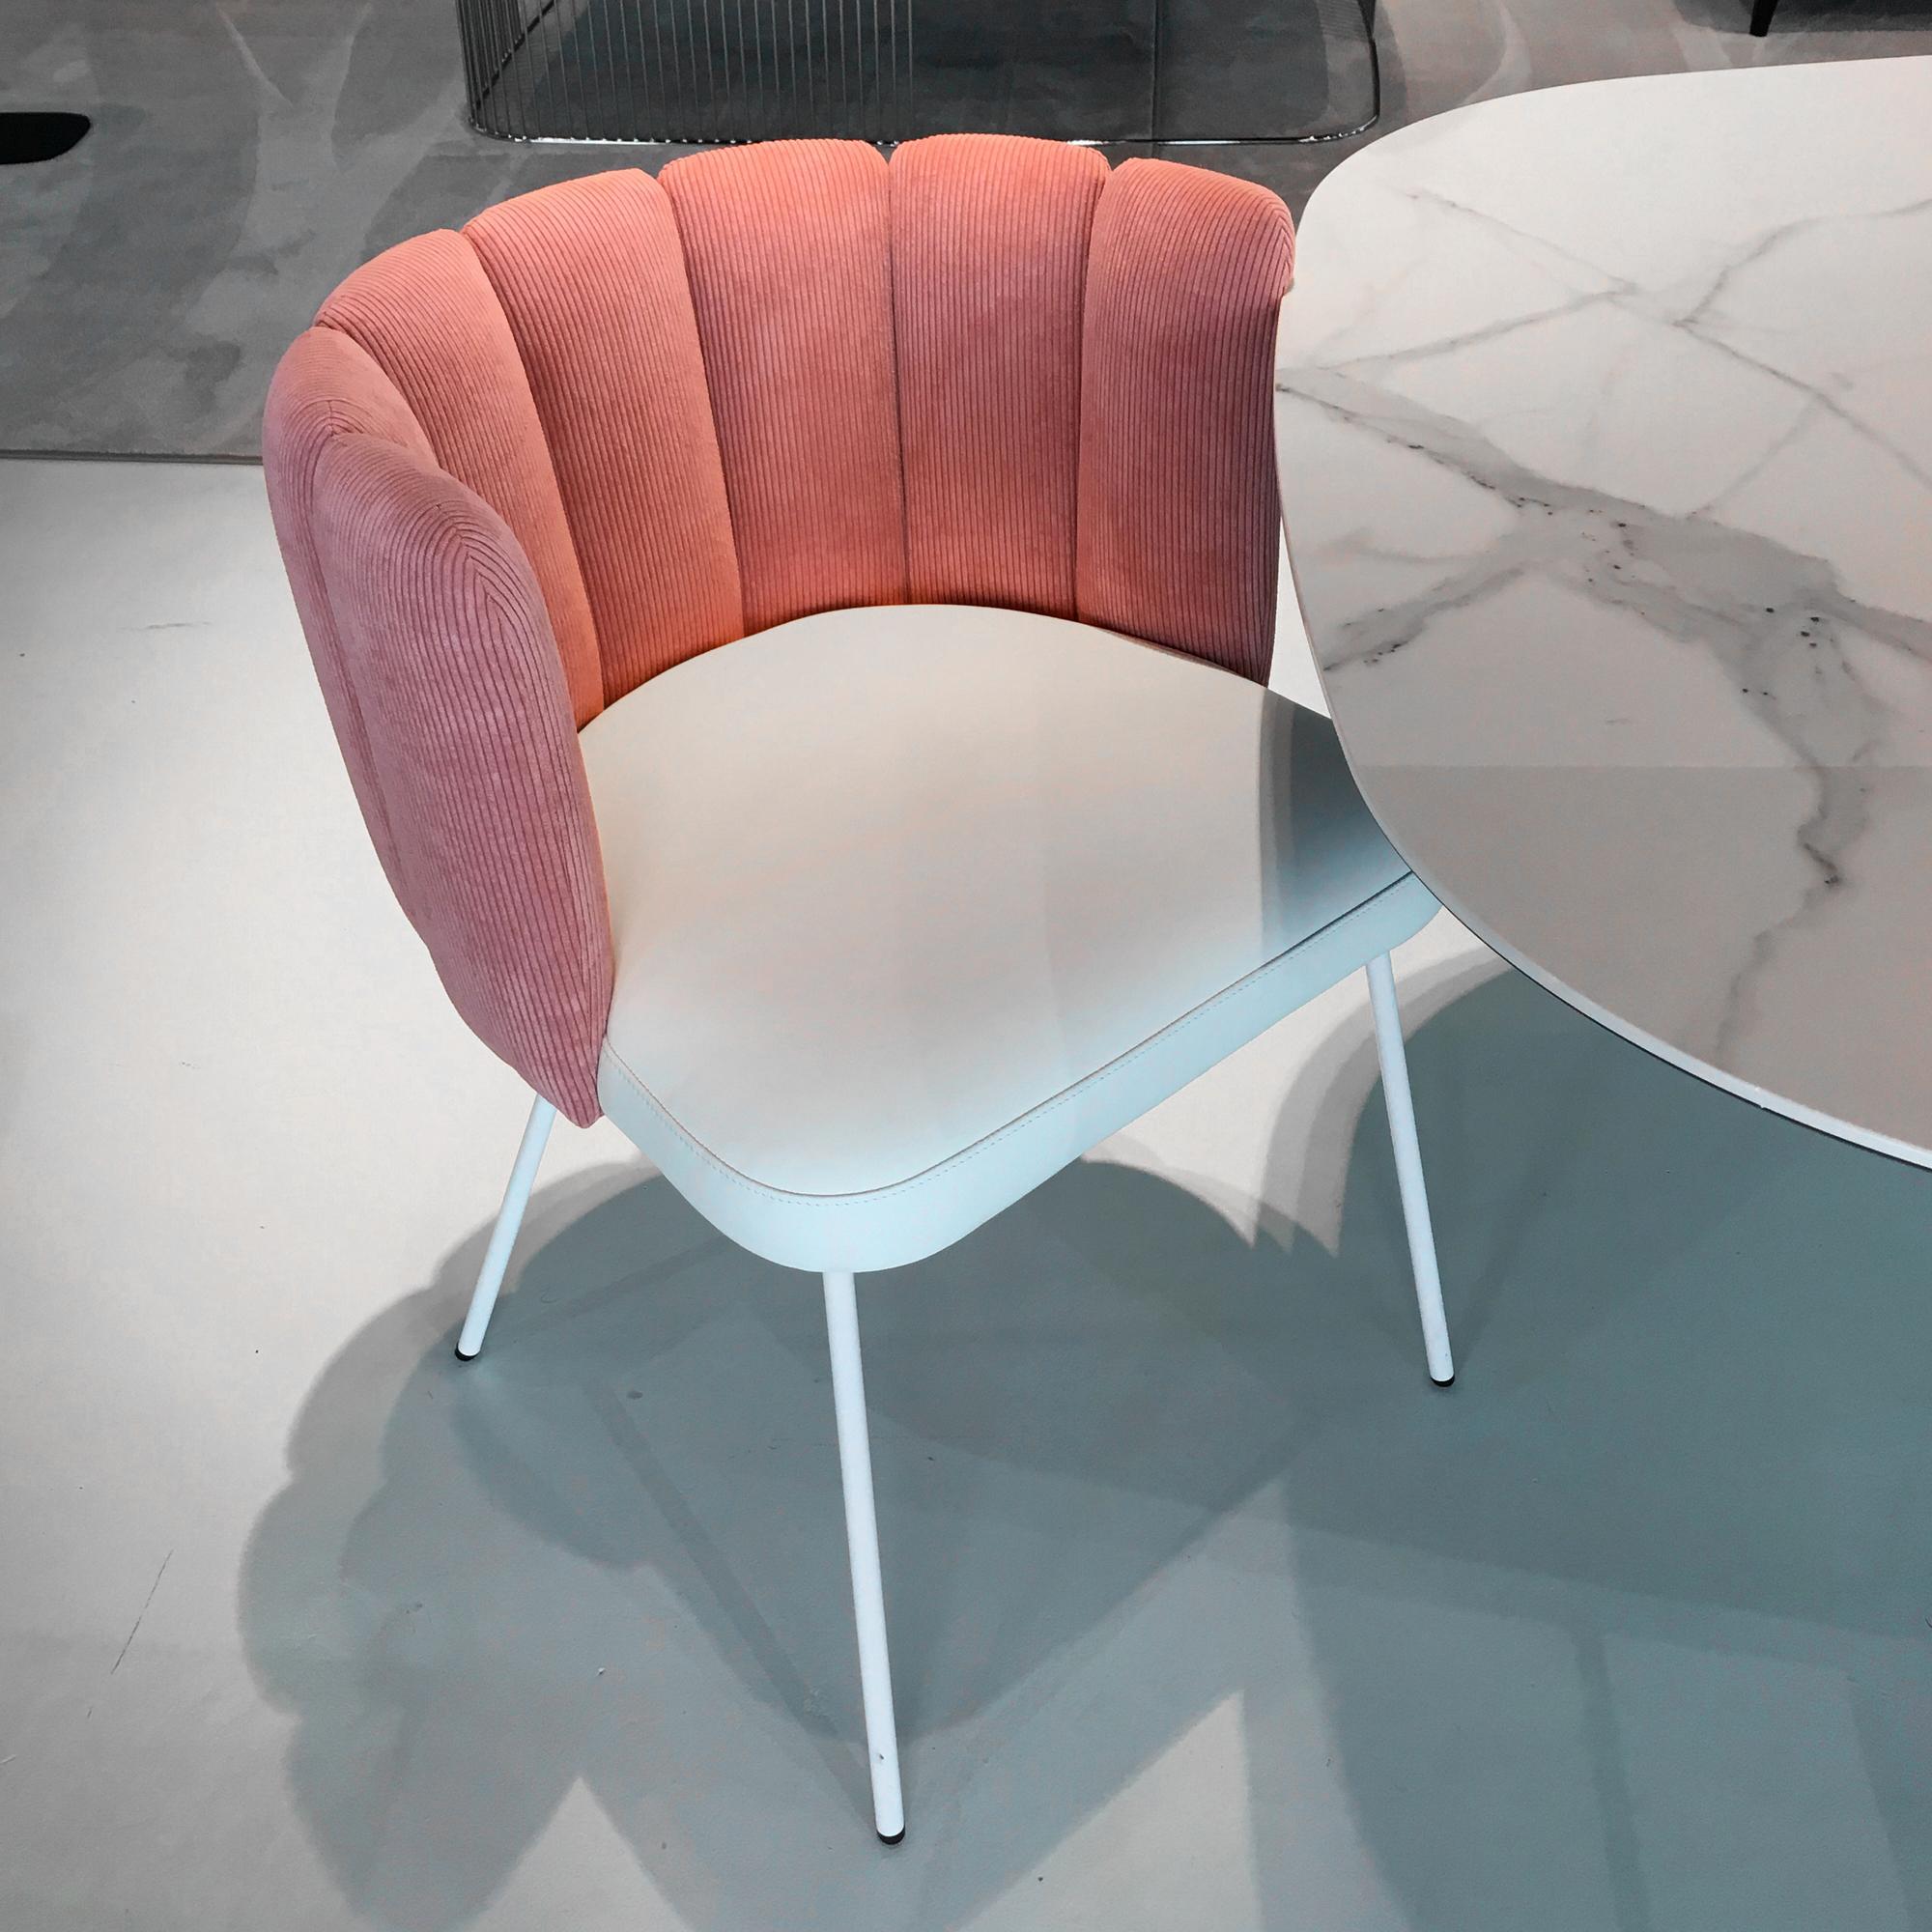 German In Stock in Los Angeles, Pink and White Velvet Armchair by Monica Armani